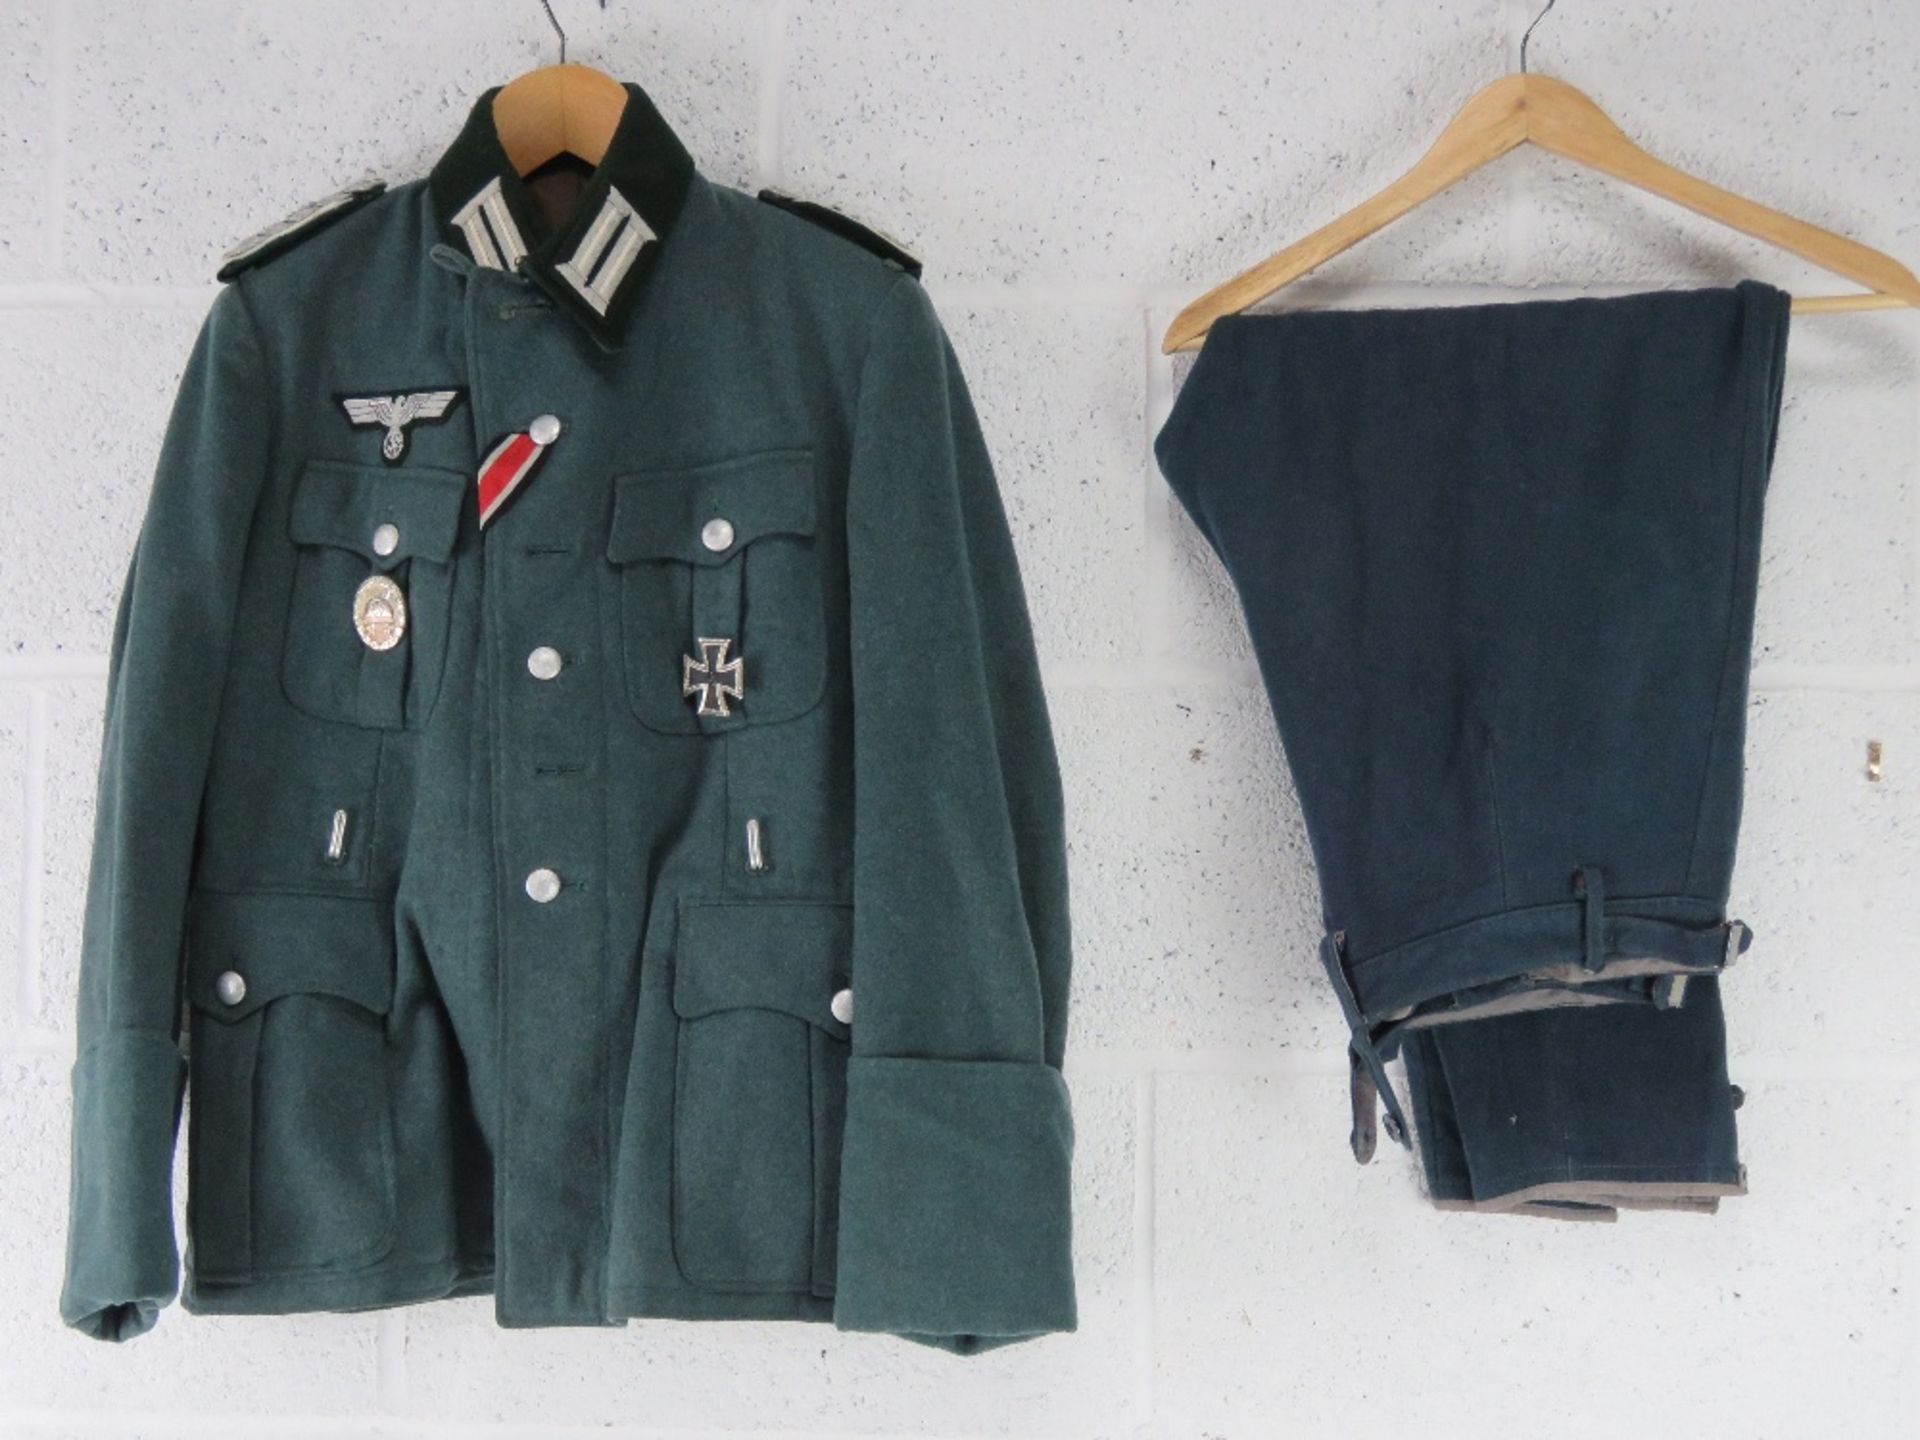 A reproduction German Combat Jacket with Insignia, and breeches.